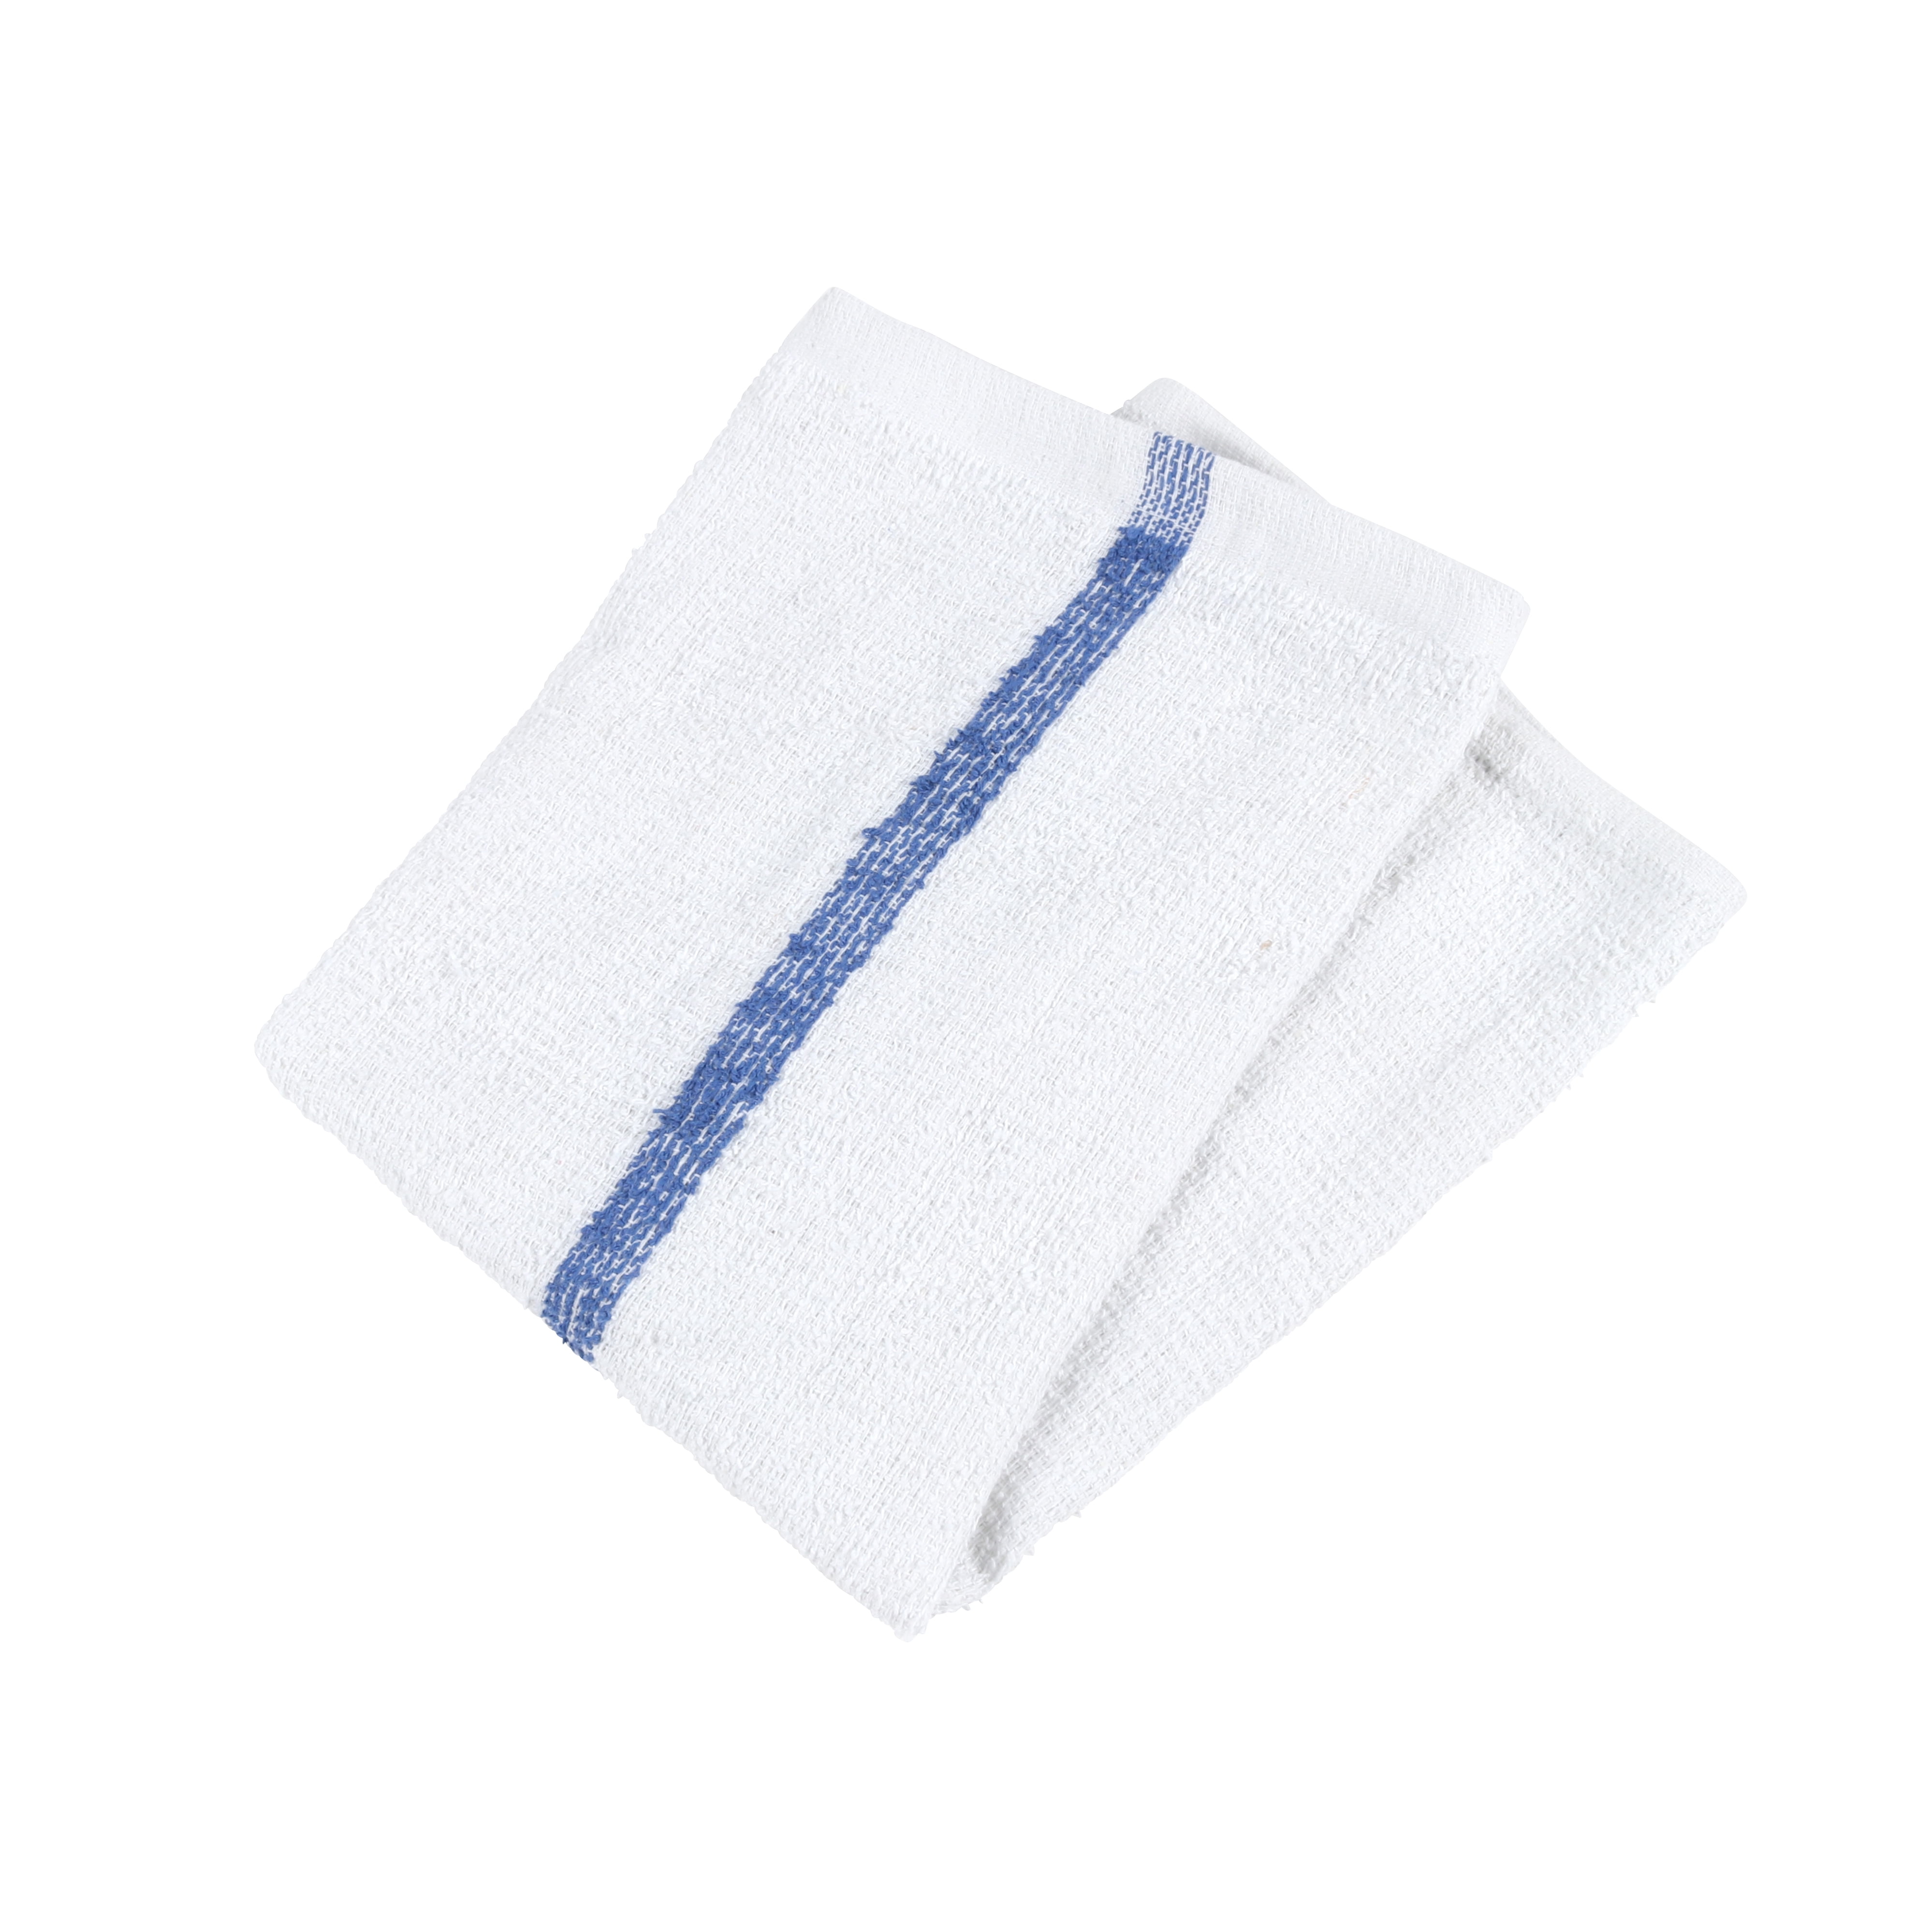 Qwick Wick Bar Mop Towels, 16 x 19 in., Terry Cotton Striped, Buy